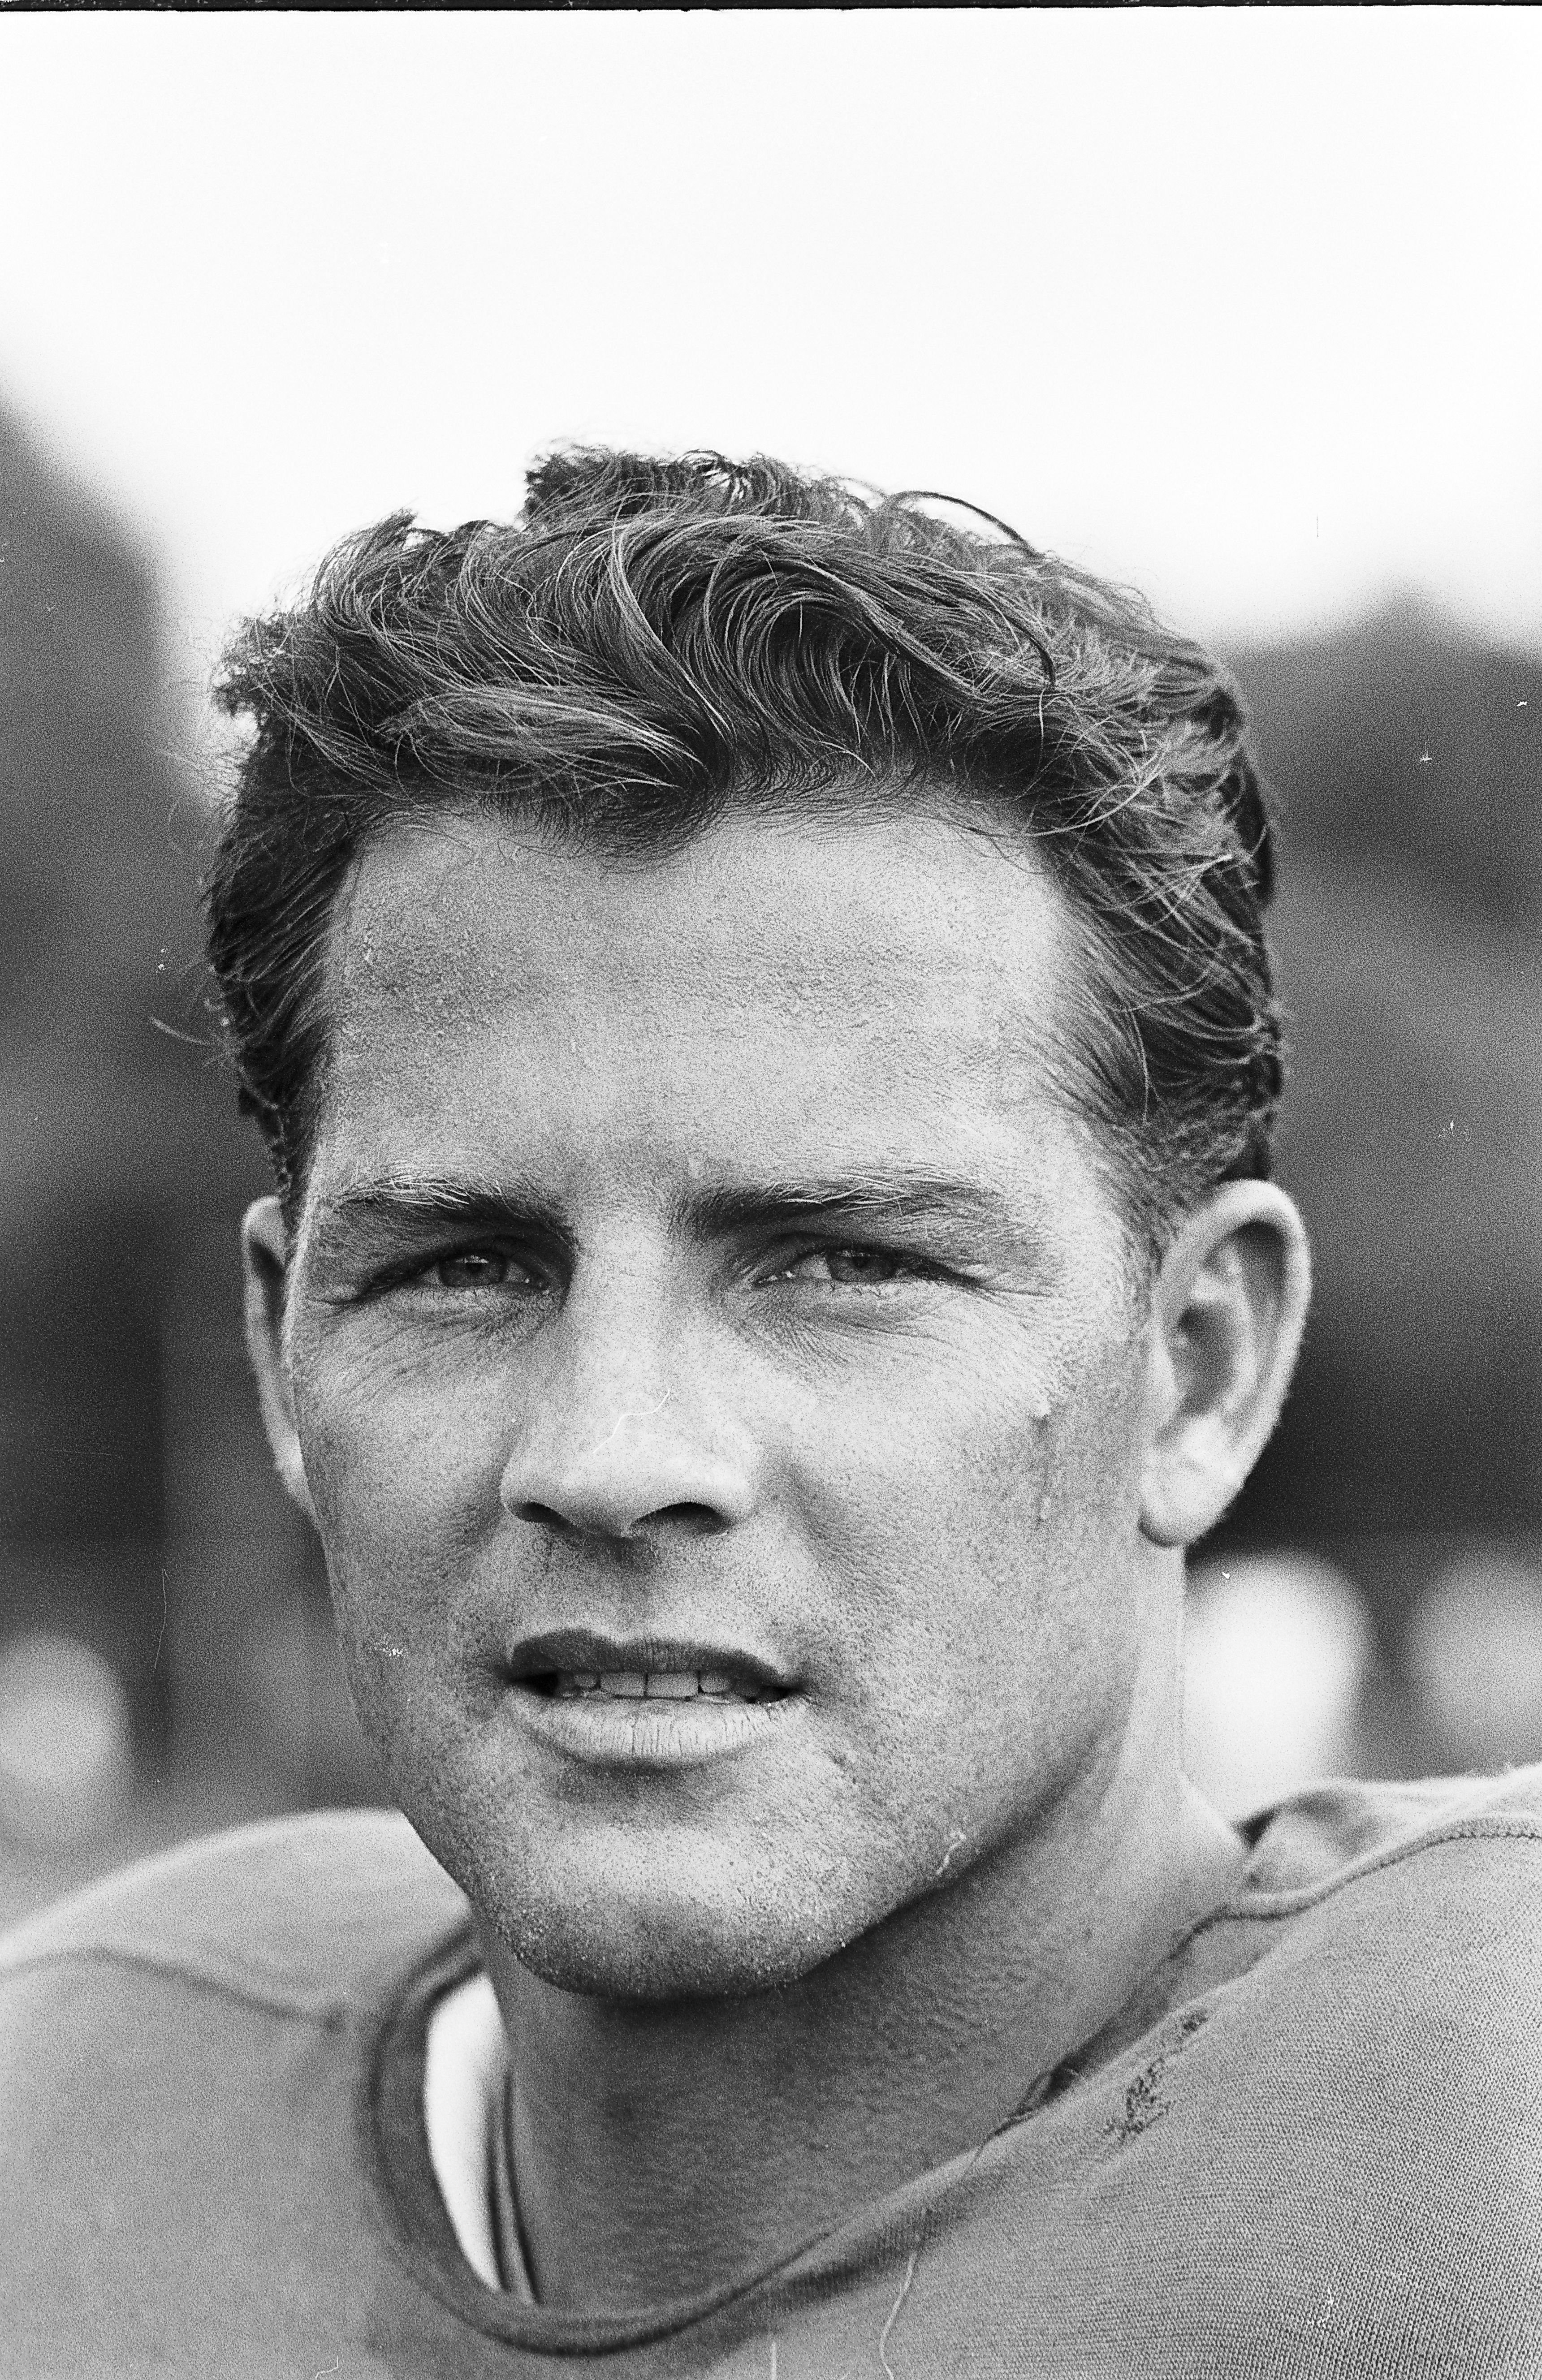 Frank Gifford returned to the Giants as a flanker after 18 months of retirement from a serious head injury in 1960, in New York in August 1962 | Source: Getty Images